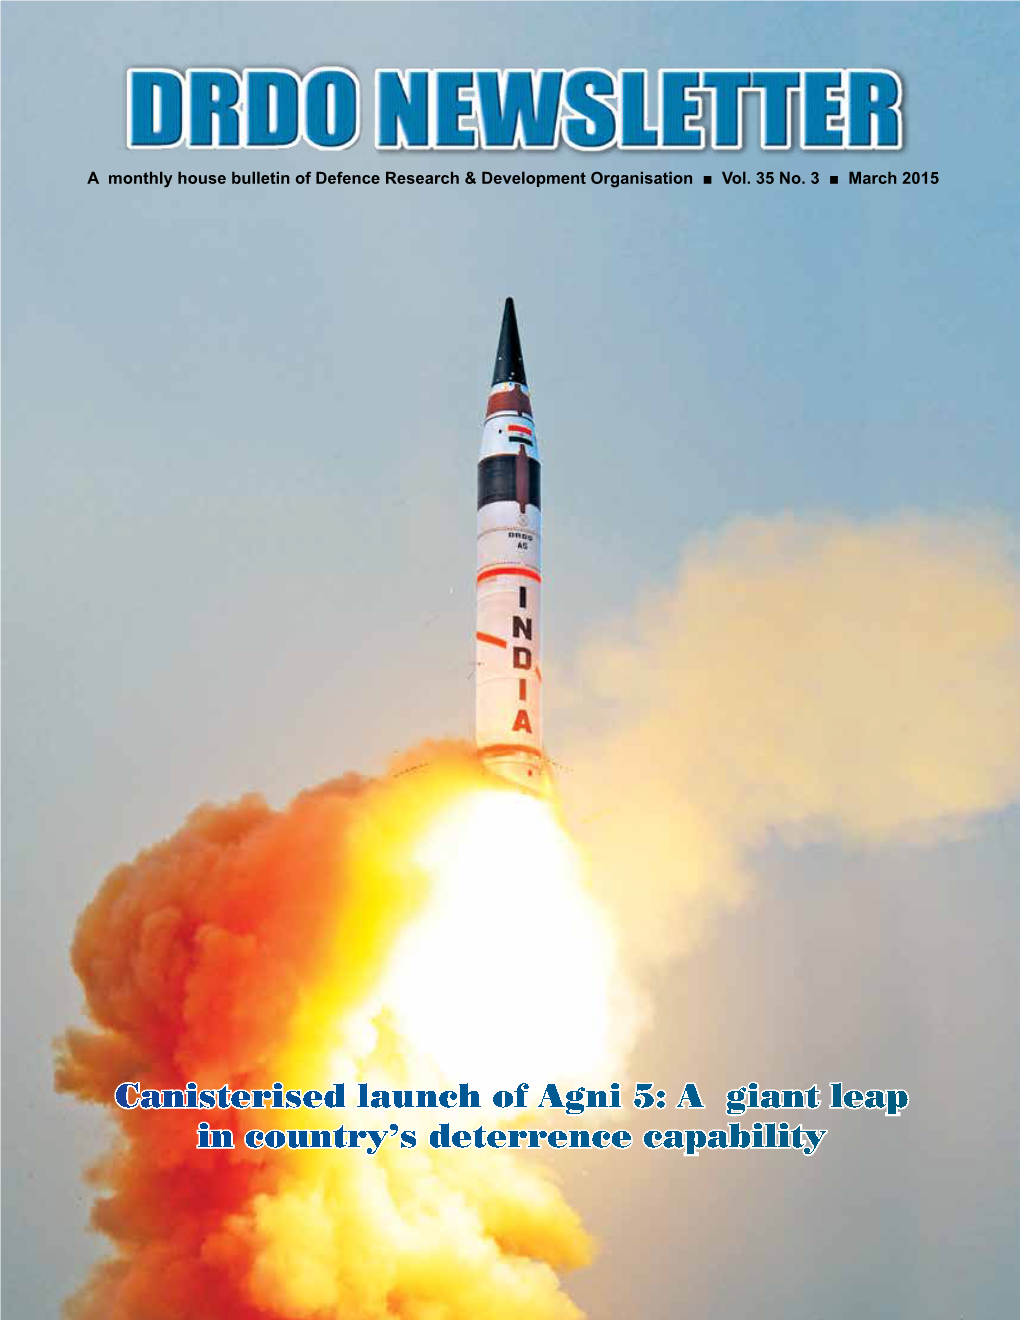 Canisterised Launch of Agni 5: a Giant Leap in Country's Deterrence Capability